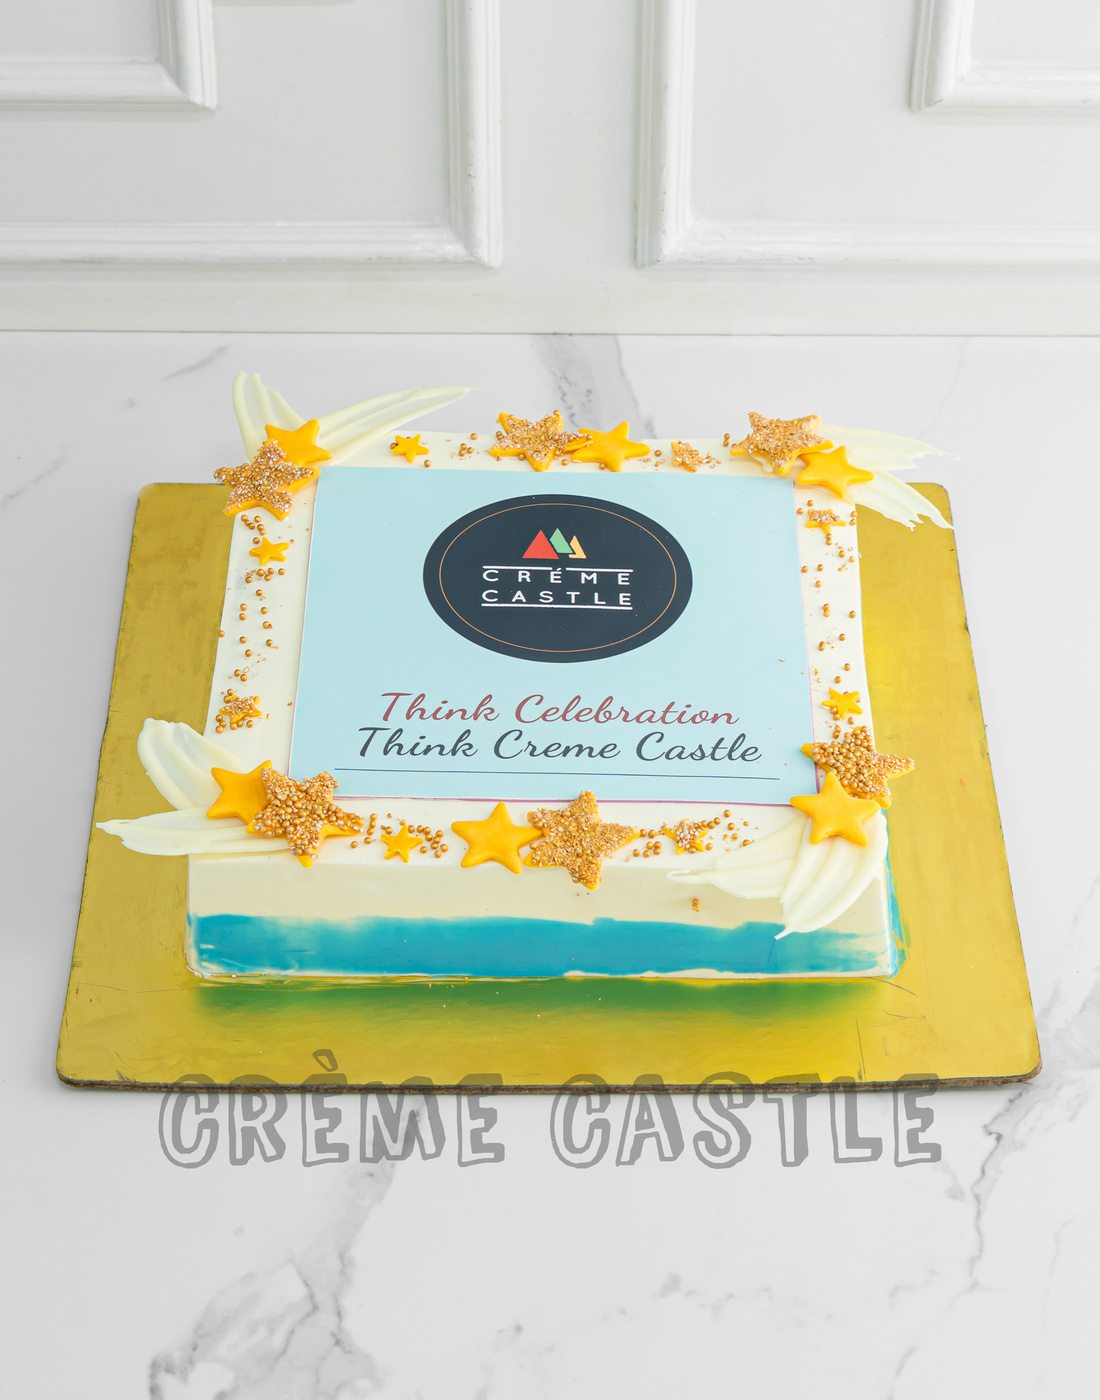 Benefits of Corporate Cakes and Balloons - Quality Cake Company